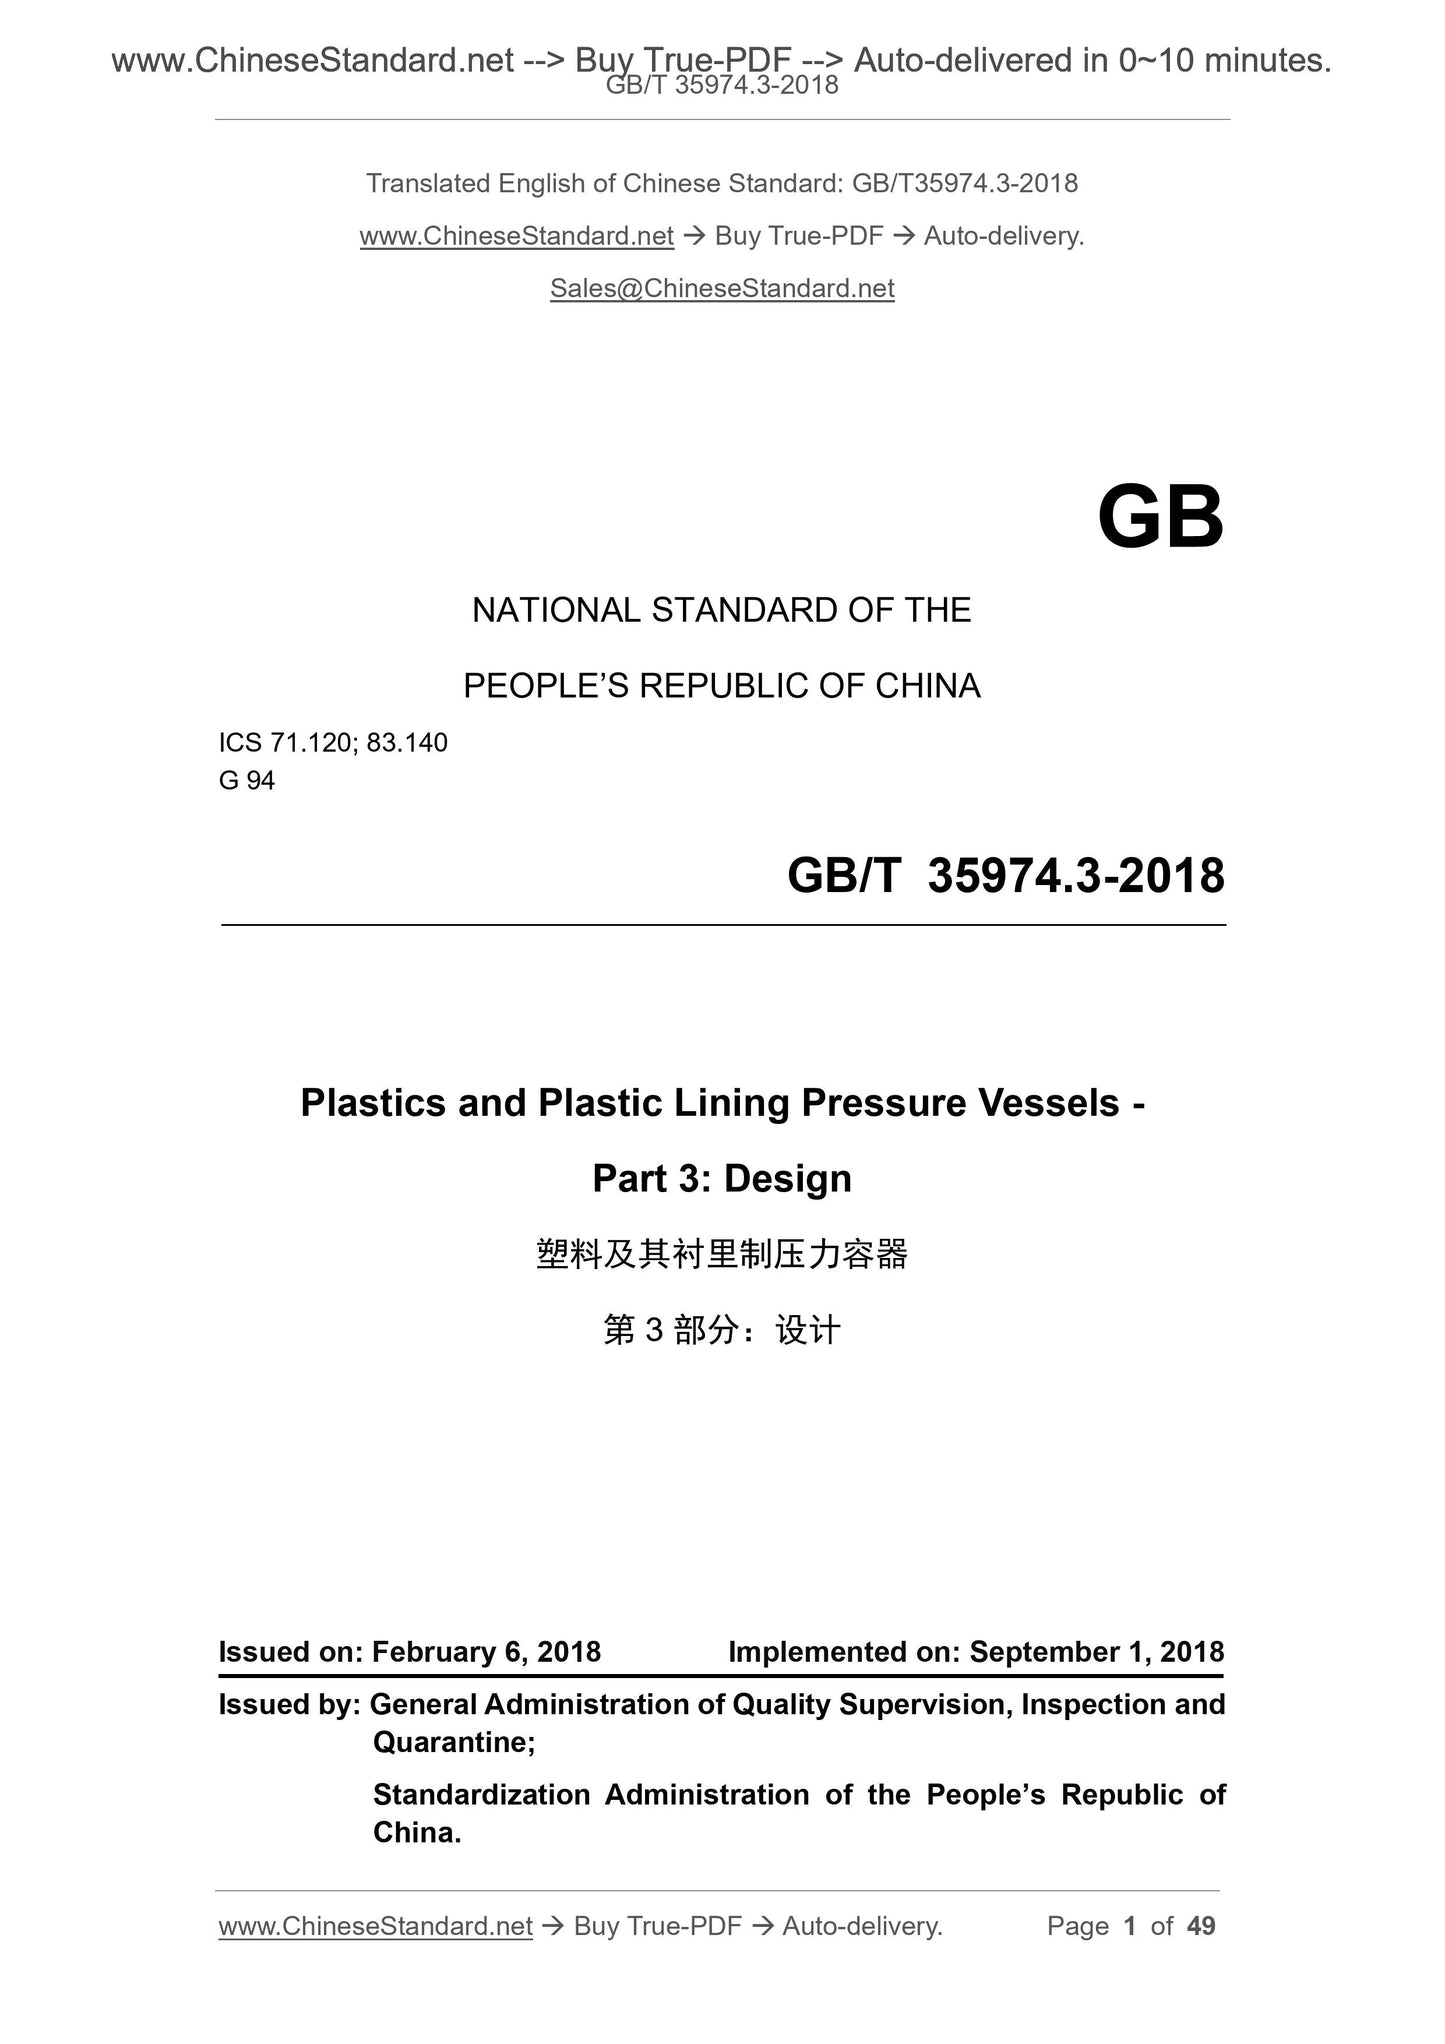 GB/T 35974.3-2018 Page 1